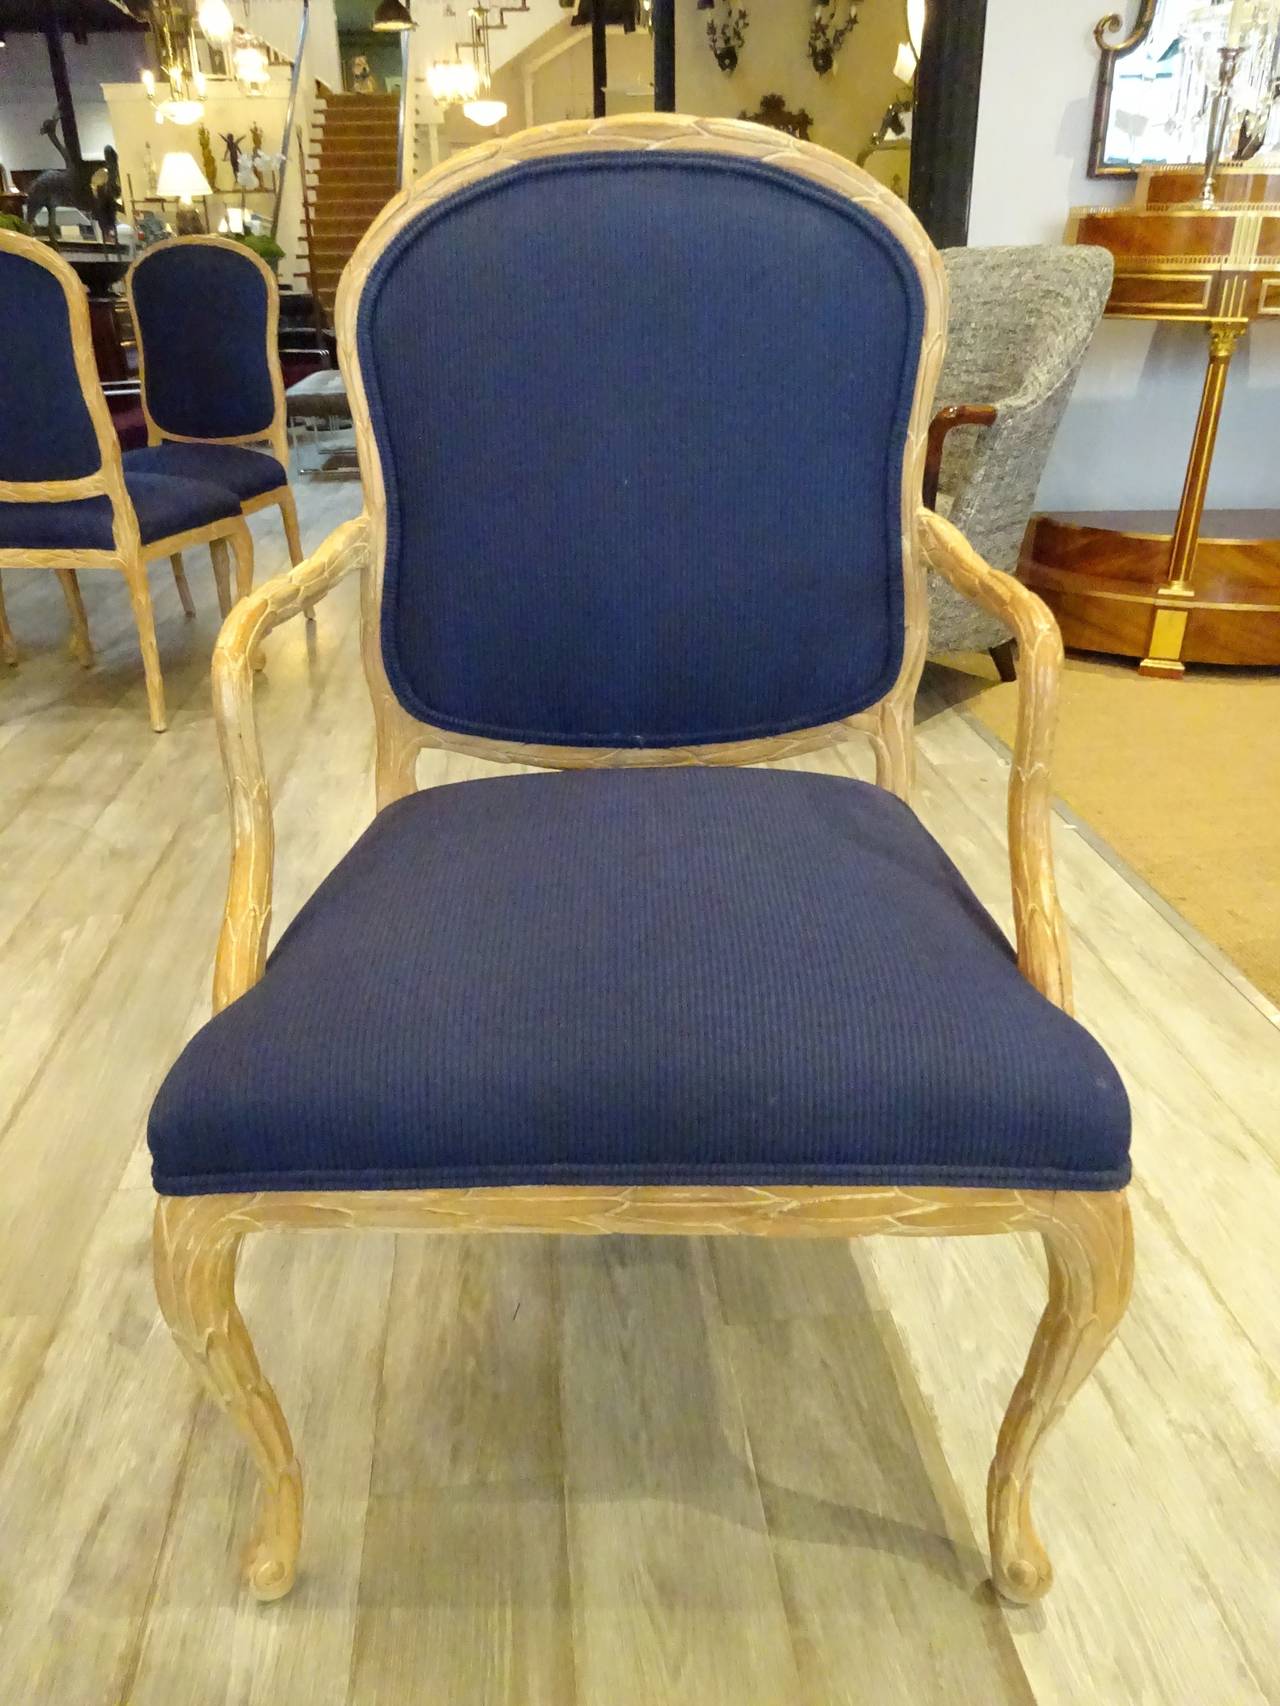 Set of six Serge Roche style faux bois palmate dining chairs, each one of carved beechwood, with blue upholstery.
Armchair measures: 39" H x 20" D x 24" W.
Side chair measures: 19" W x 39" H x 18" D.